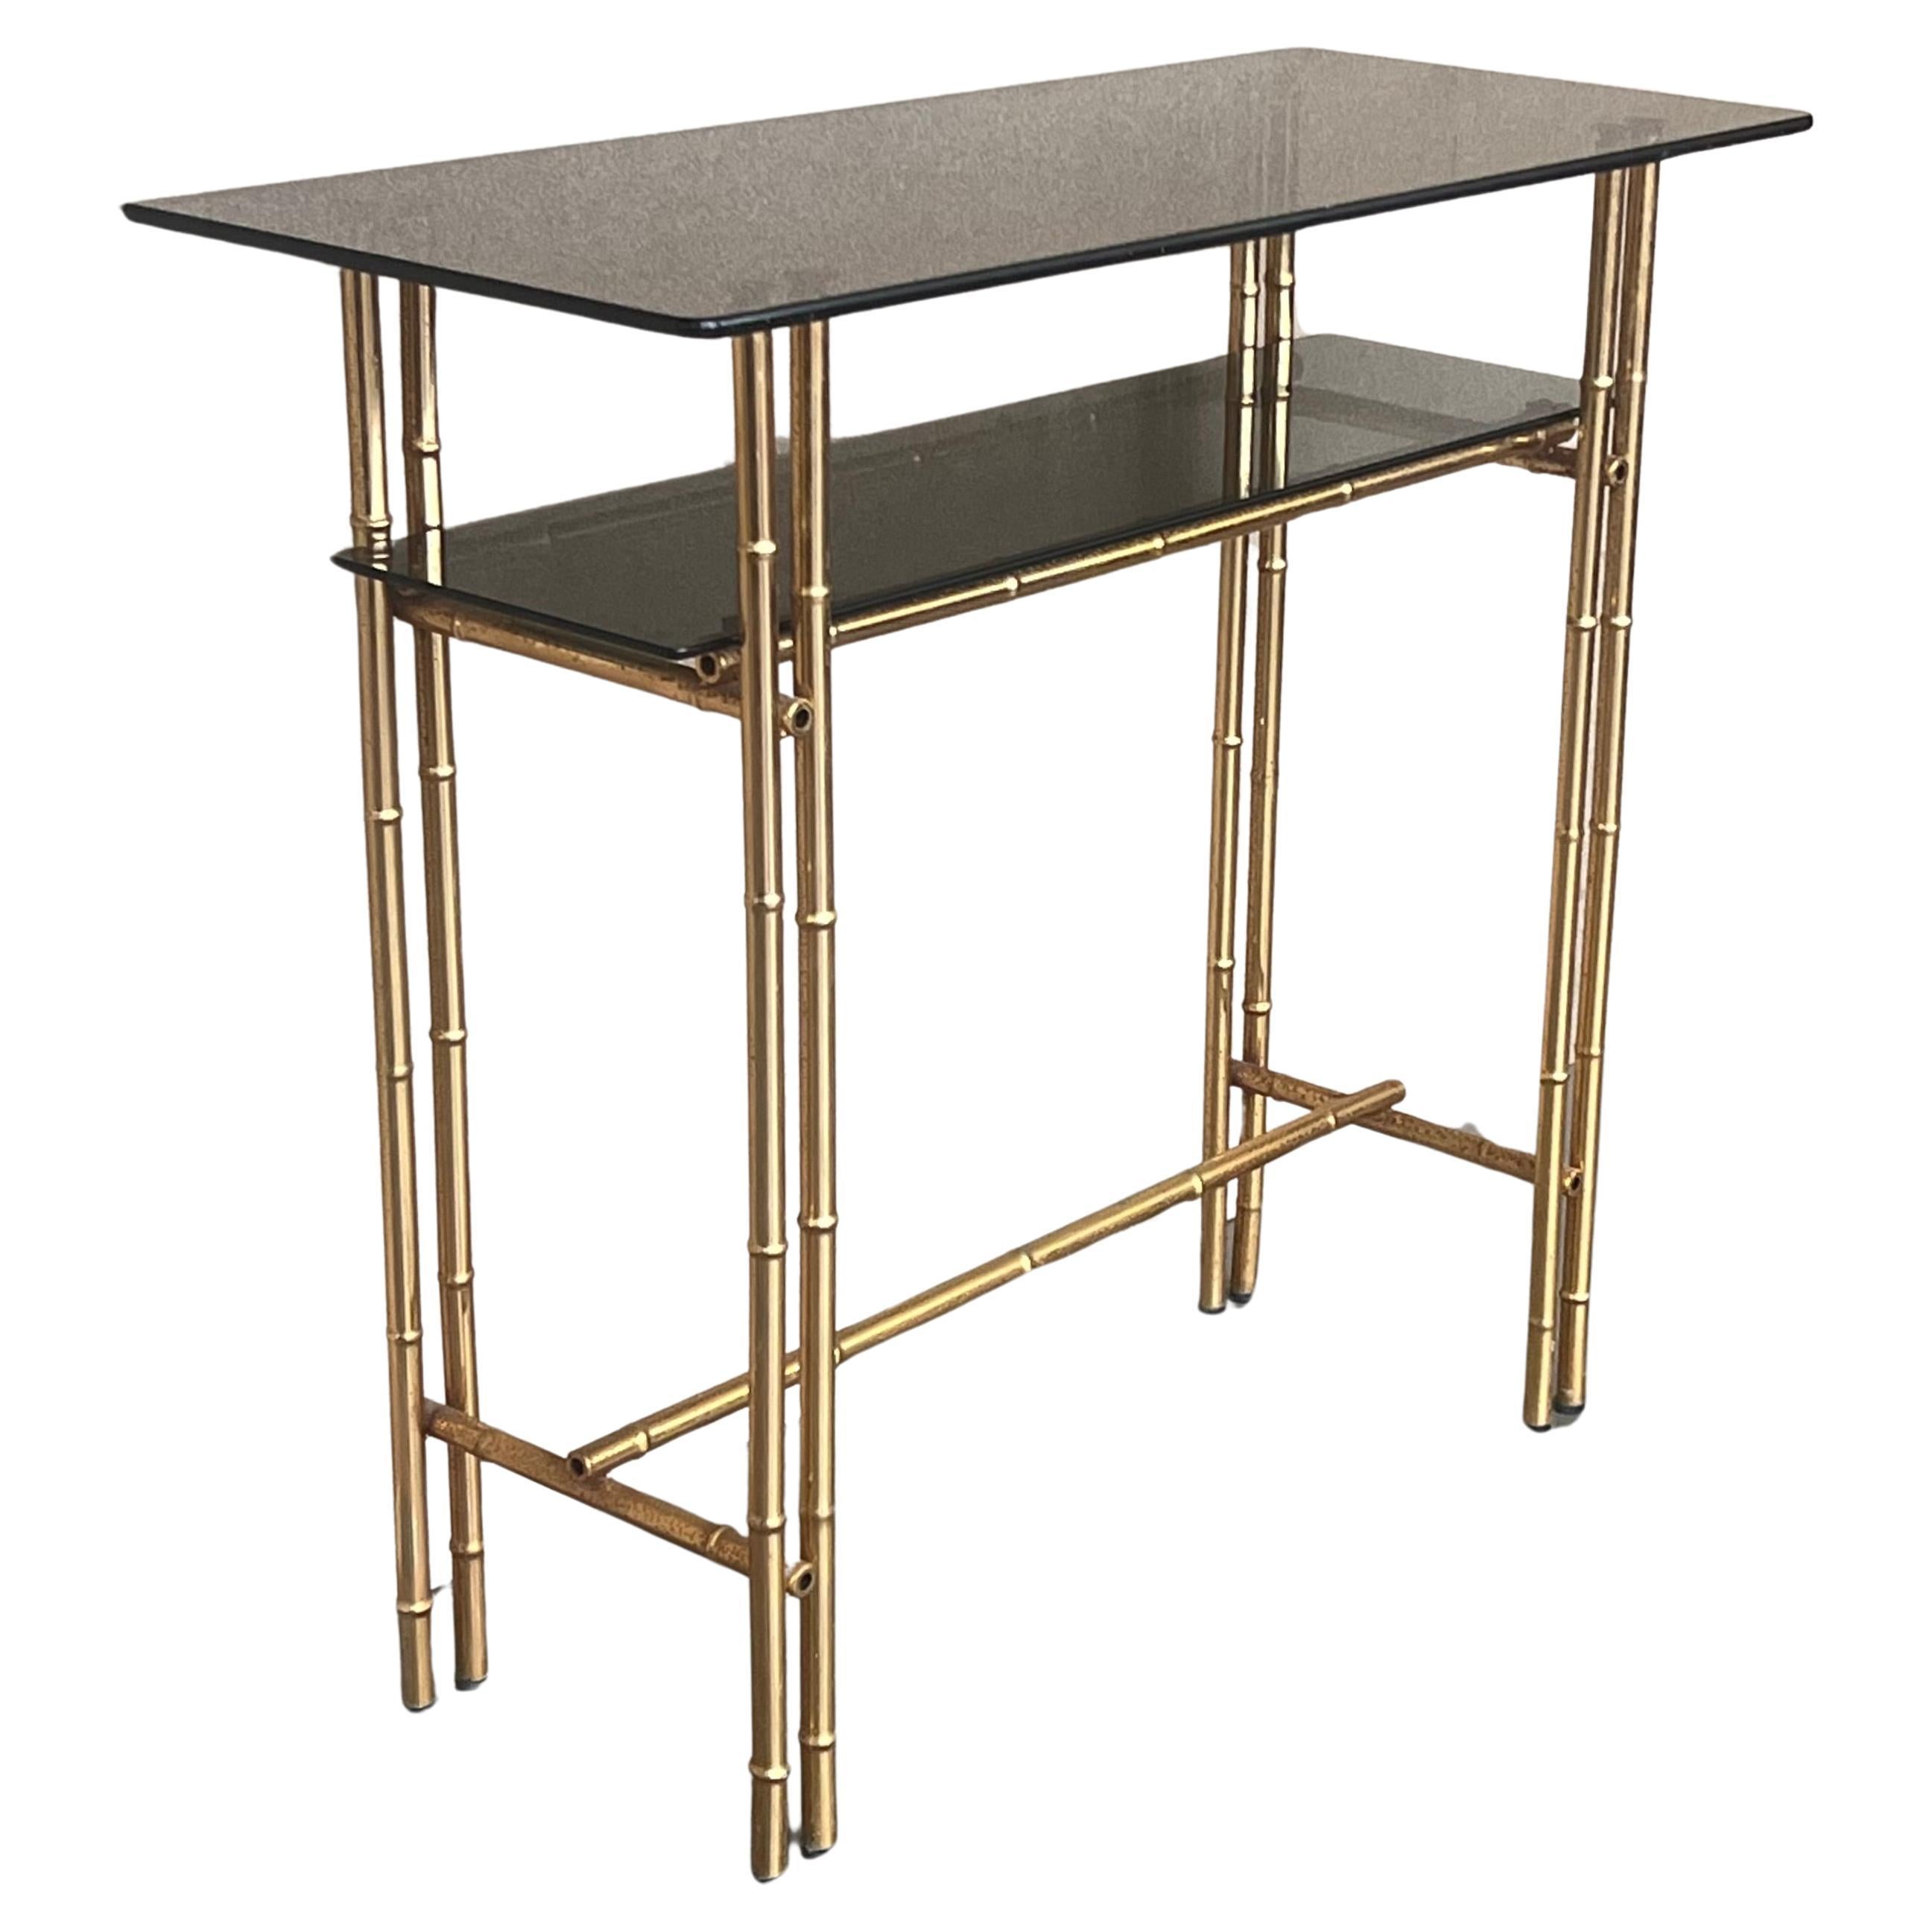 Mid-Century Modern Italian Faux Bamboo Gilt Metal Console with Smoked Glass